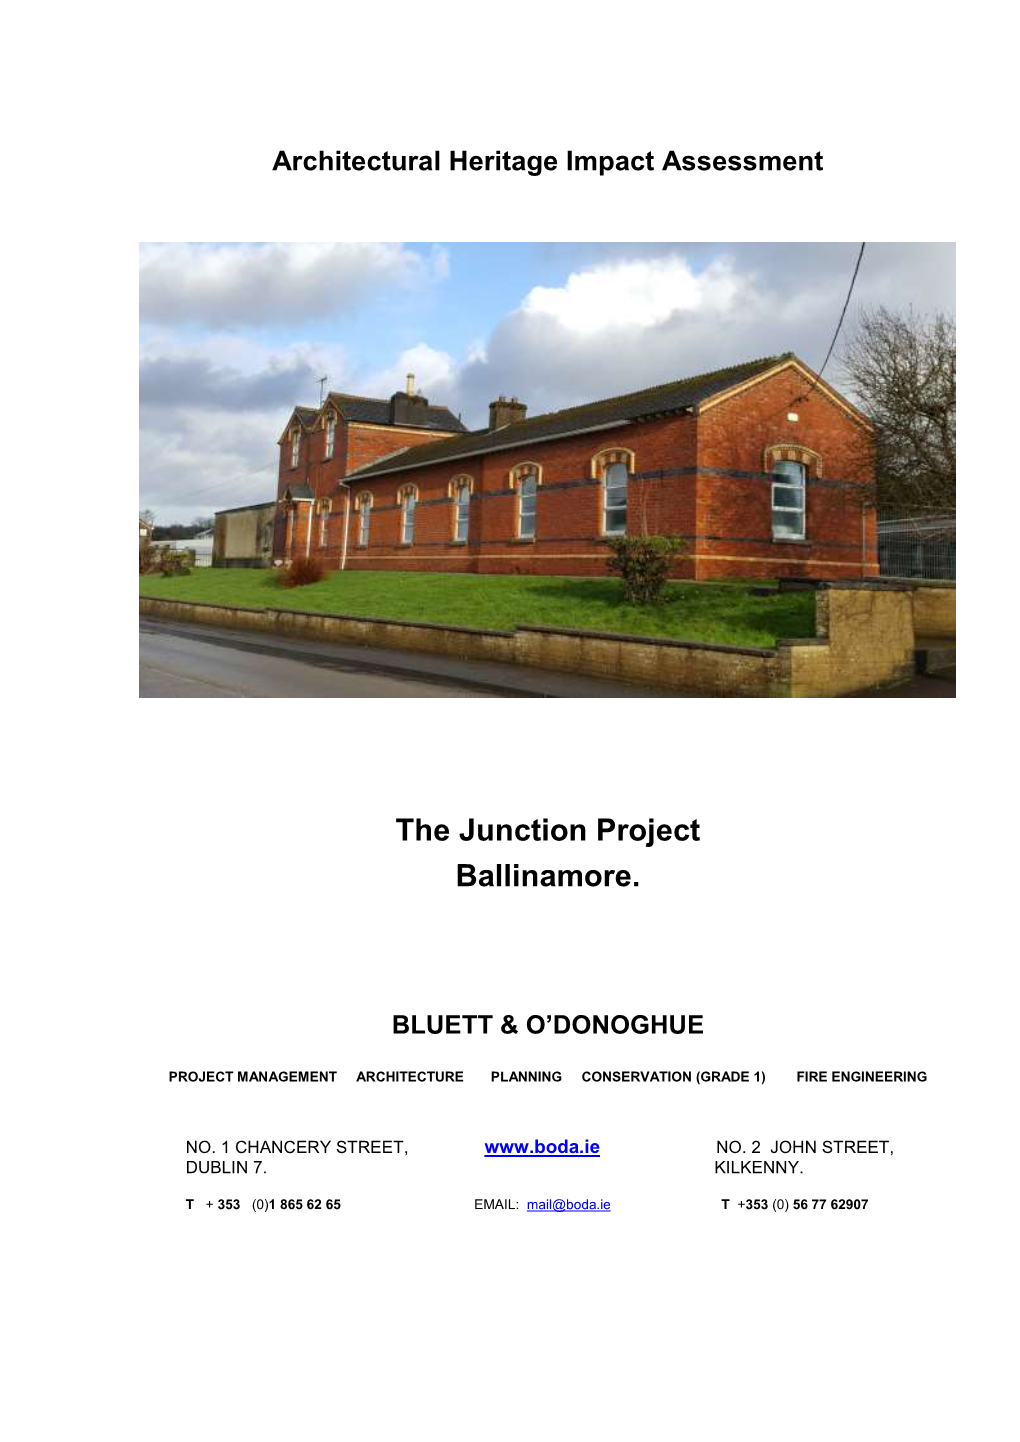 The Junction Project Ballinamore